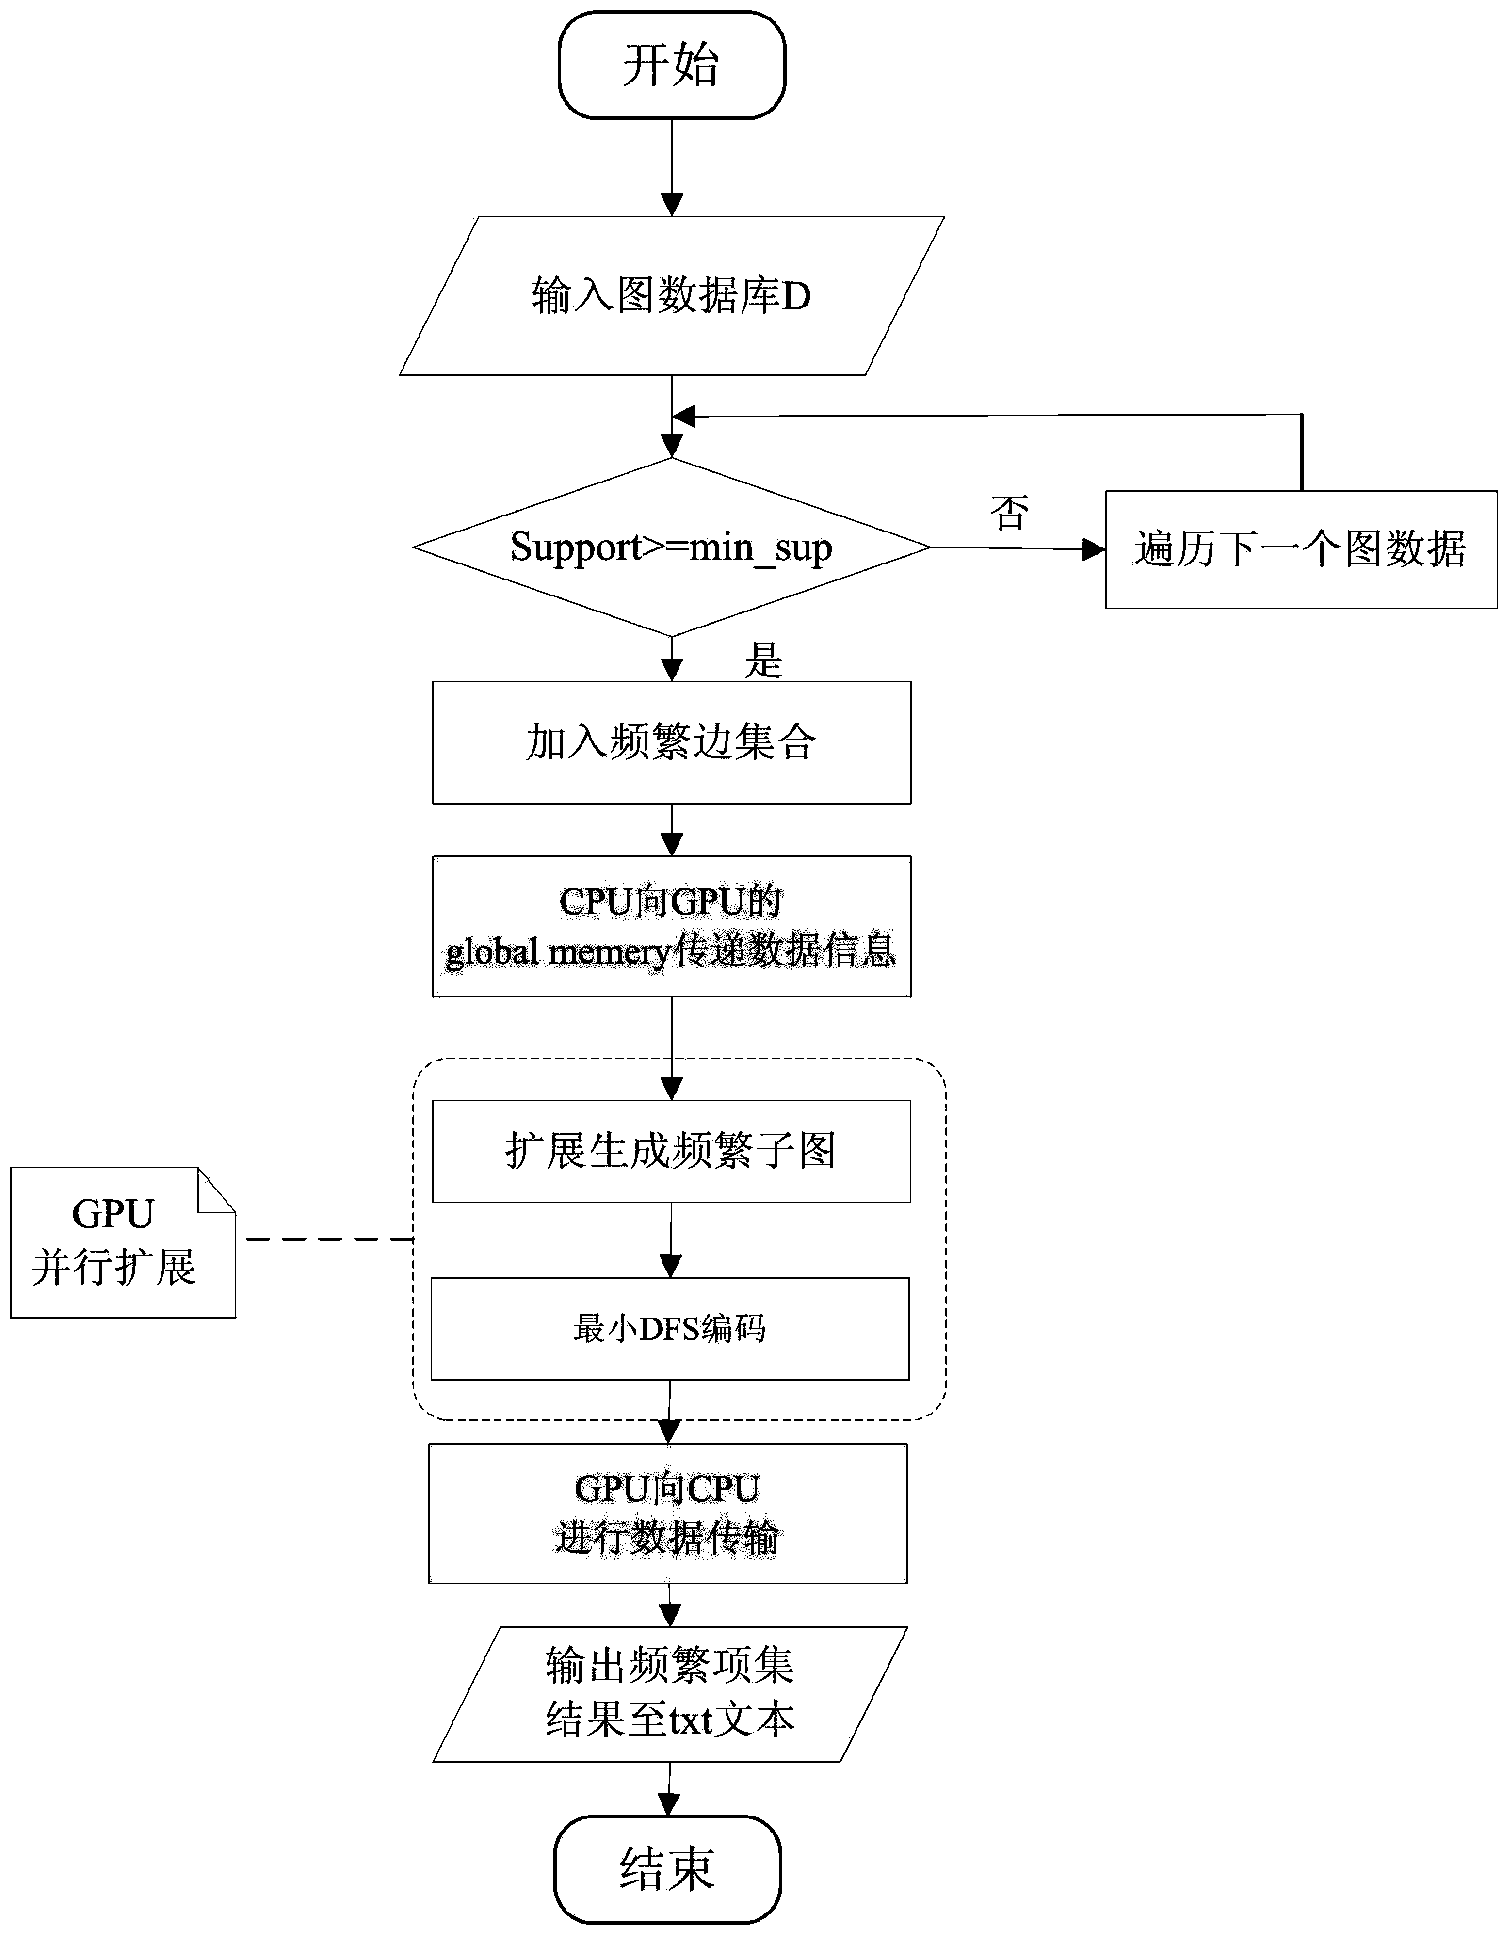 Frequent subgraph excavating method based on graphic processor parallel computing